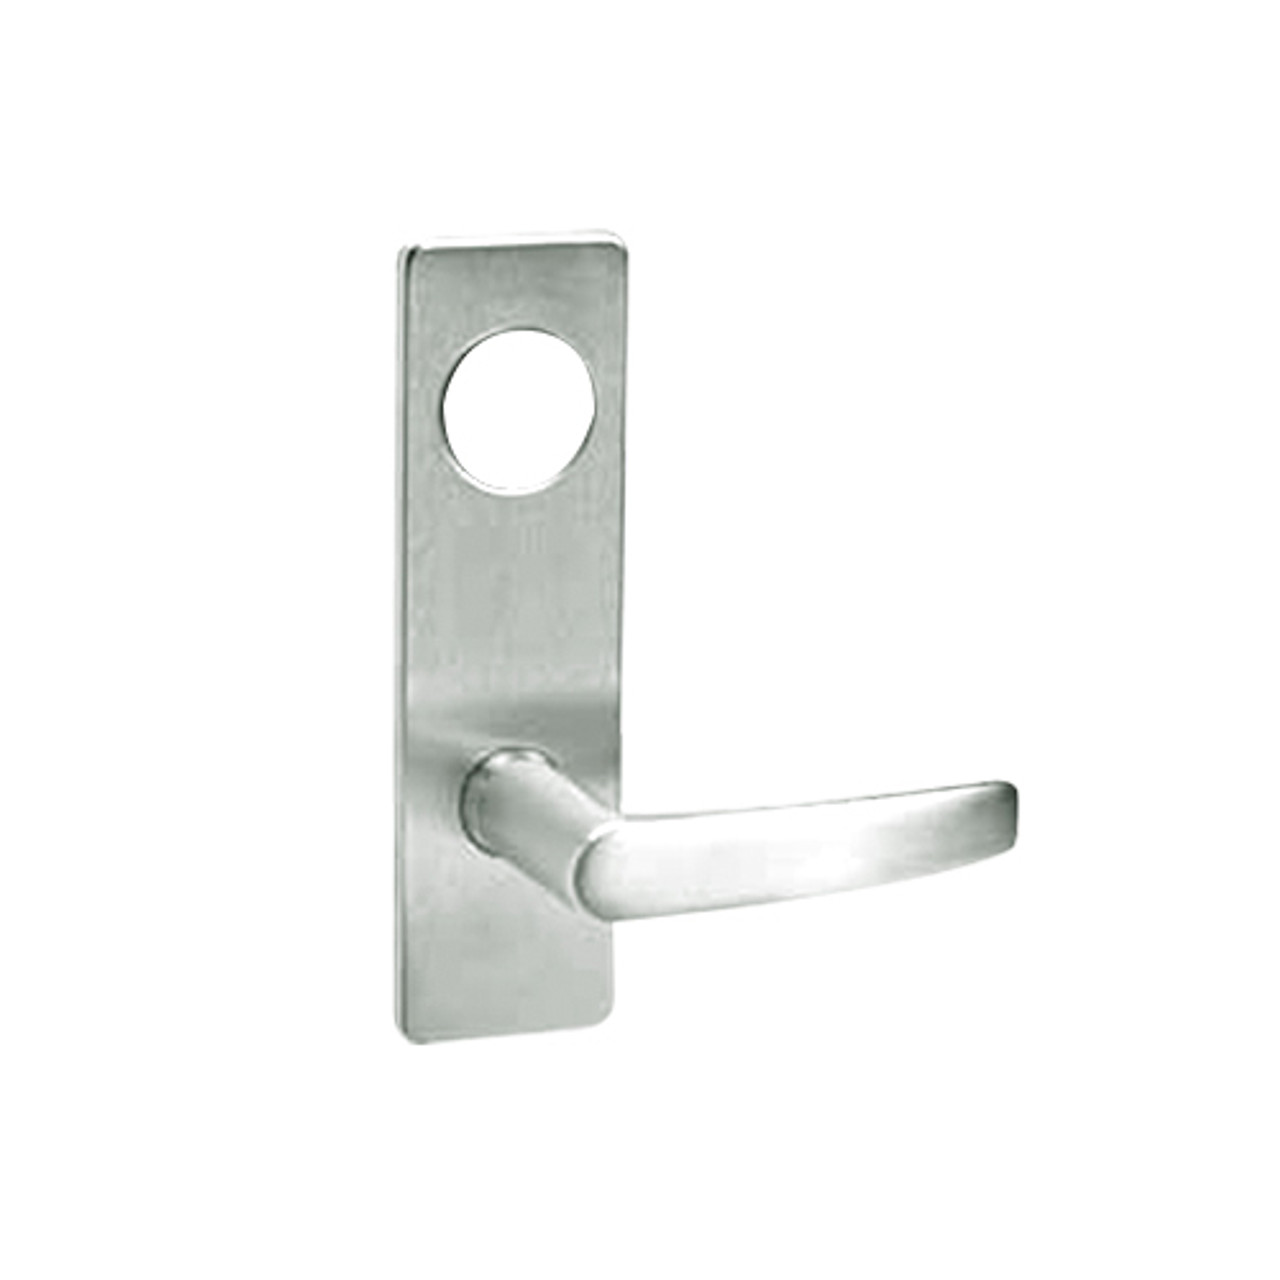 ML2057-ASP-618-CL7 Corbin Russwin ML2000 Series IC 7-Pin Less Core Mortise Storeroom Locksets with Armstrong Lever in Bright Nickel